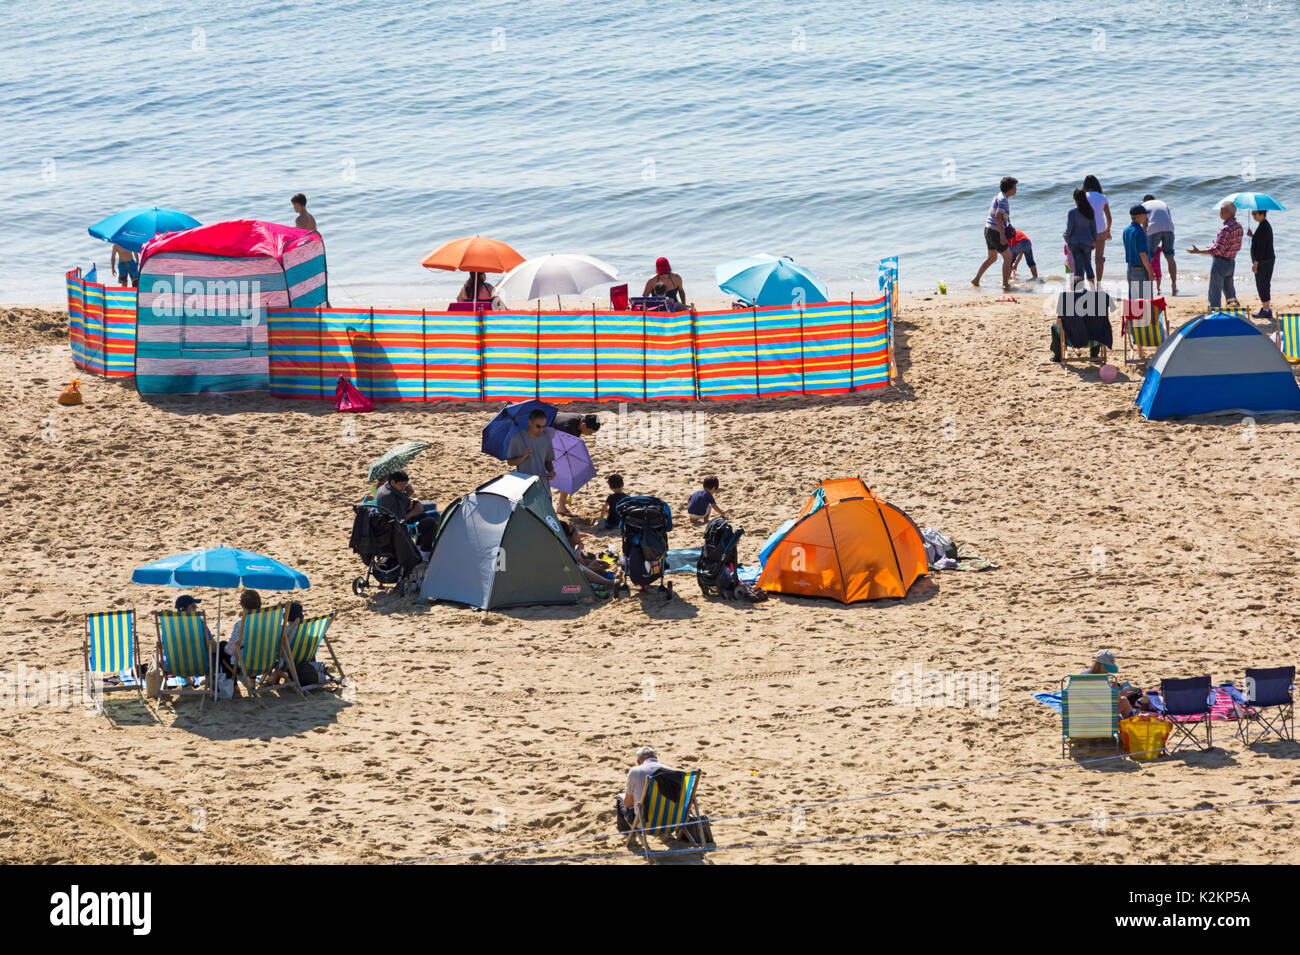 Bournemouth, Dorset, UK. 1st Sep, 2017. UK weather: lovely warm sunny day at Bournemouth beach - visitors get there early to get a good spot for the second day of the Bournemouth Air Festival on the South Coast. Credit: Carolyn Jenkins/Alamy Live News Stock Photo